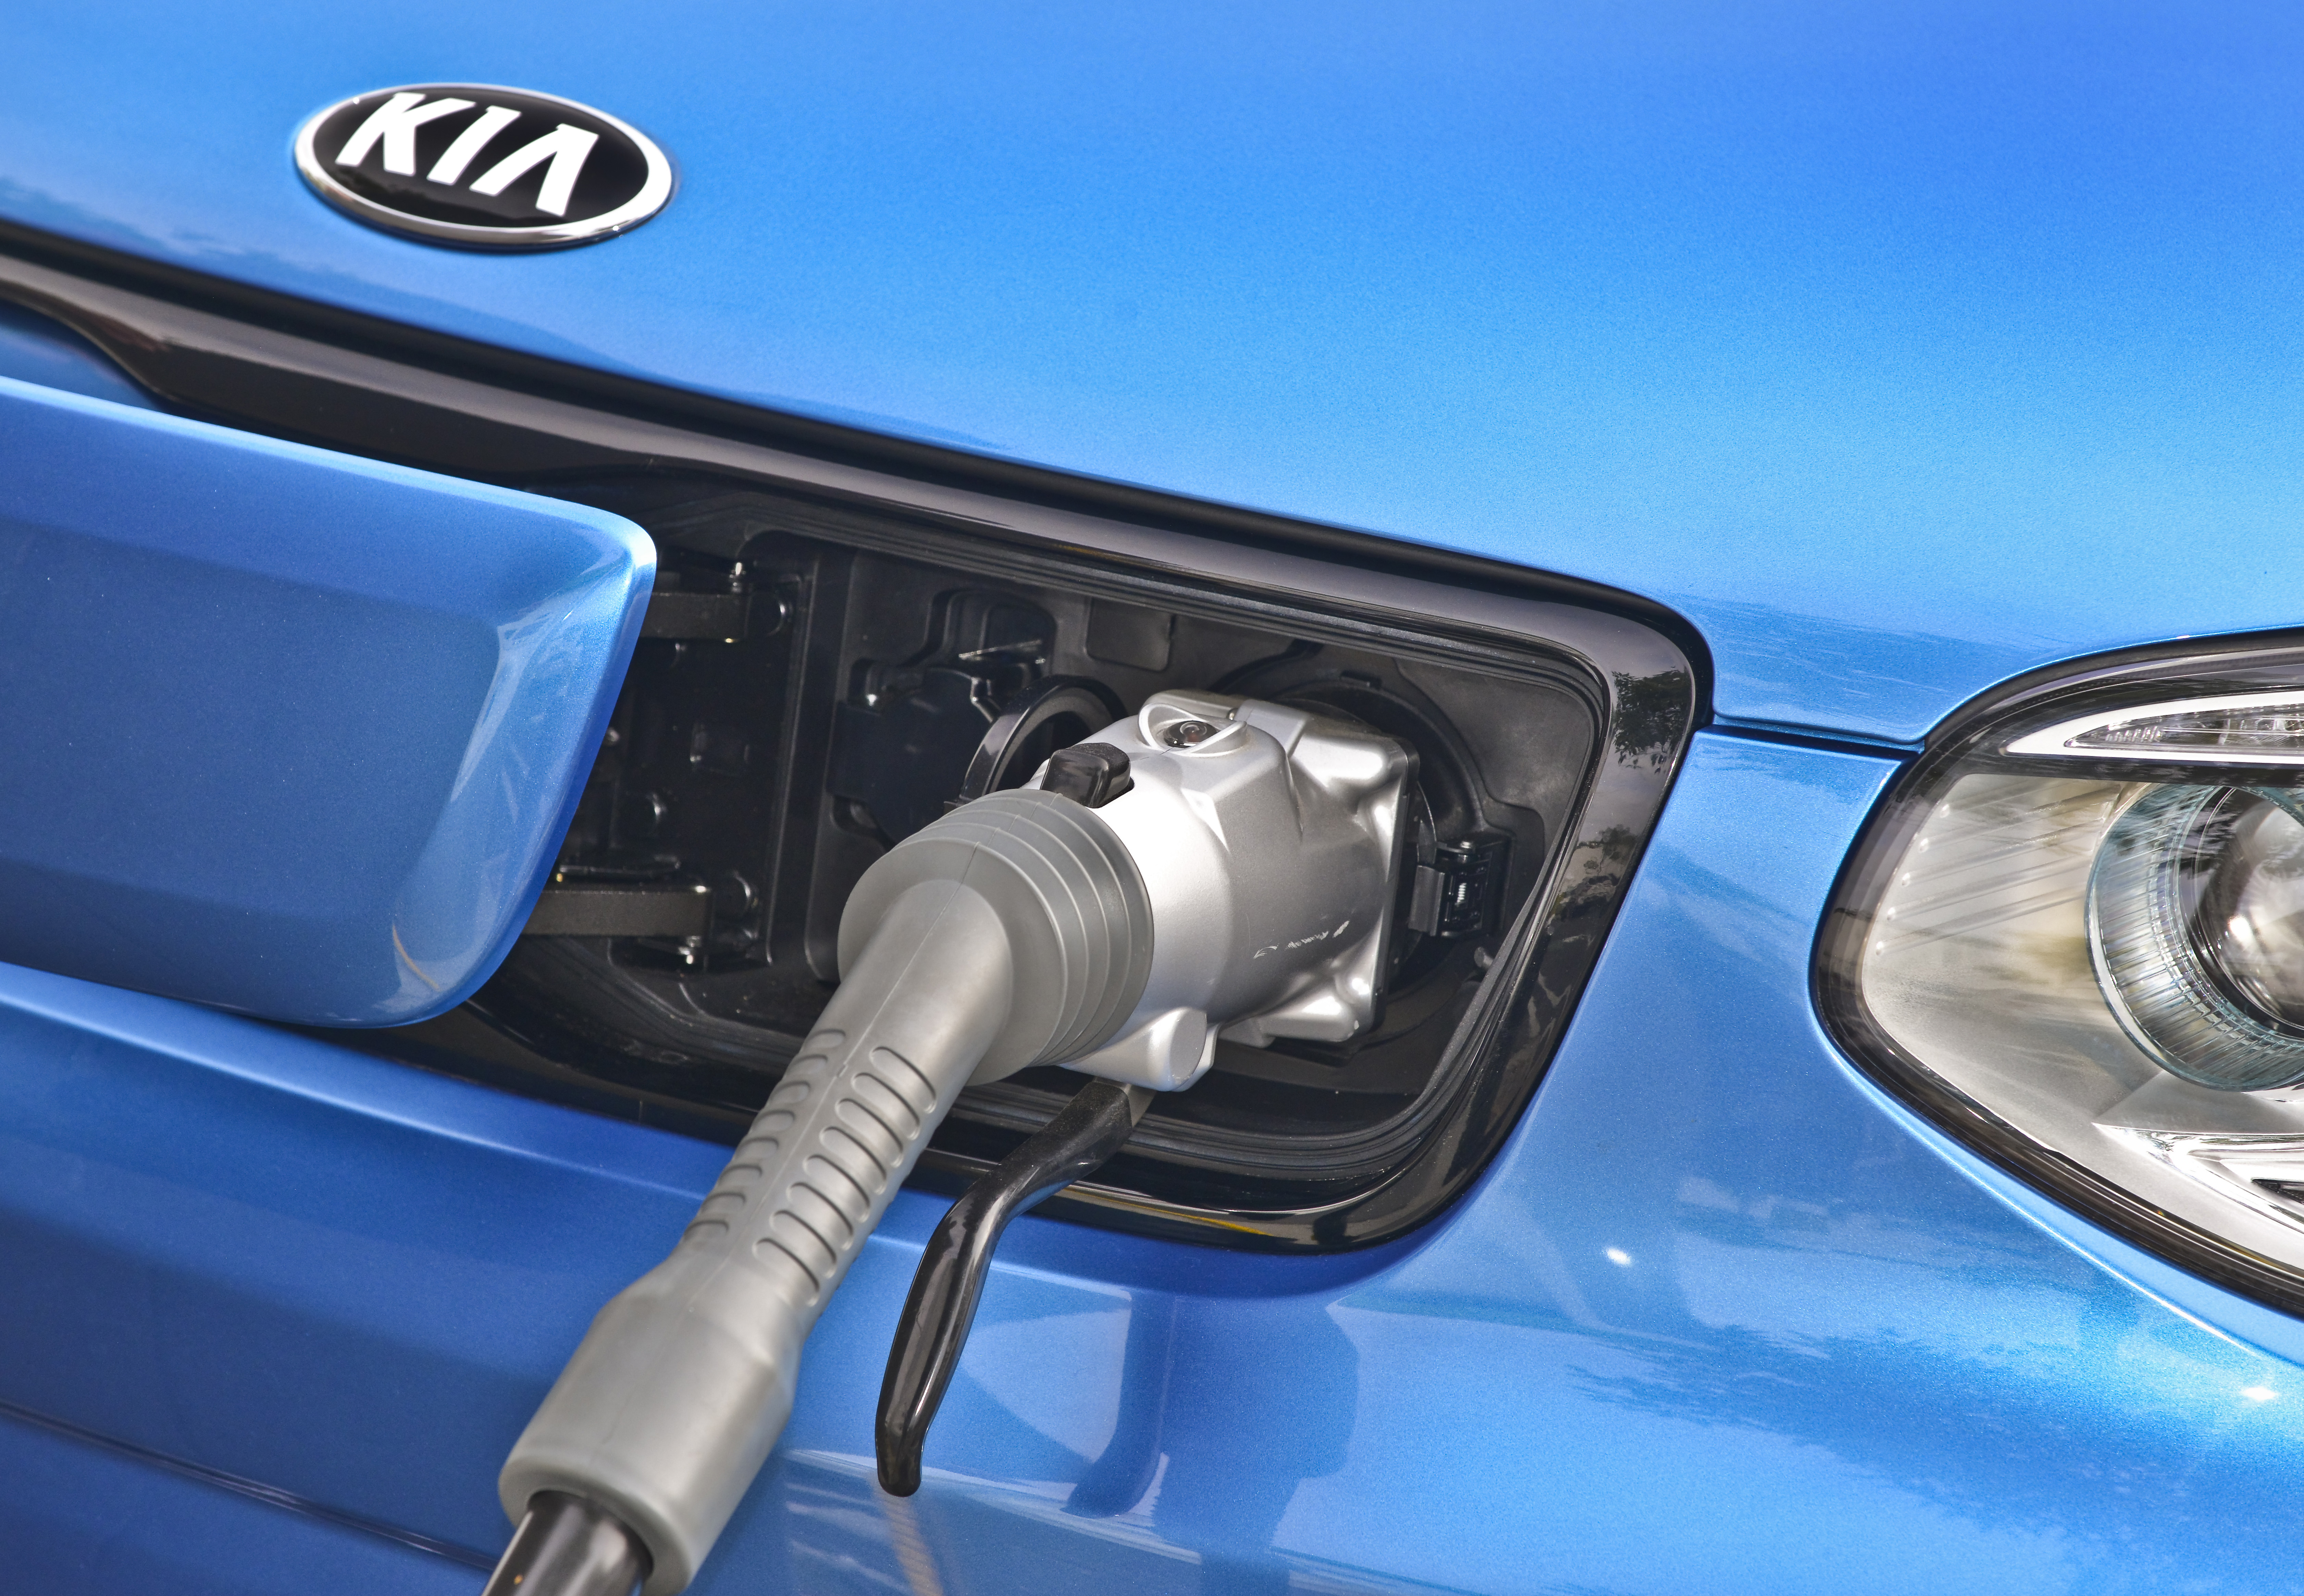 Kia Motors America is kicking off the implementation of a robust charging network in advance of the Soul EV going on sale in California during the third quarter of this year. (image credit: Kia Motors America)